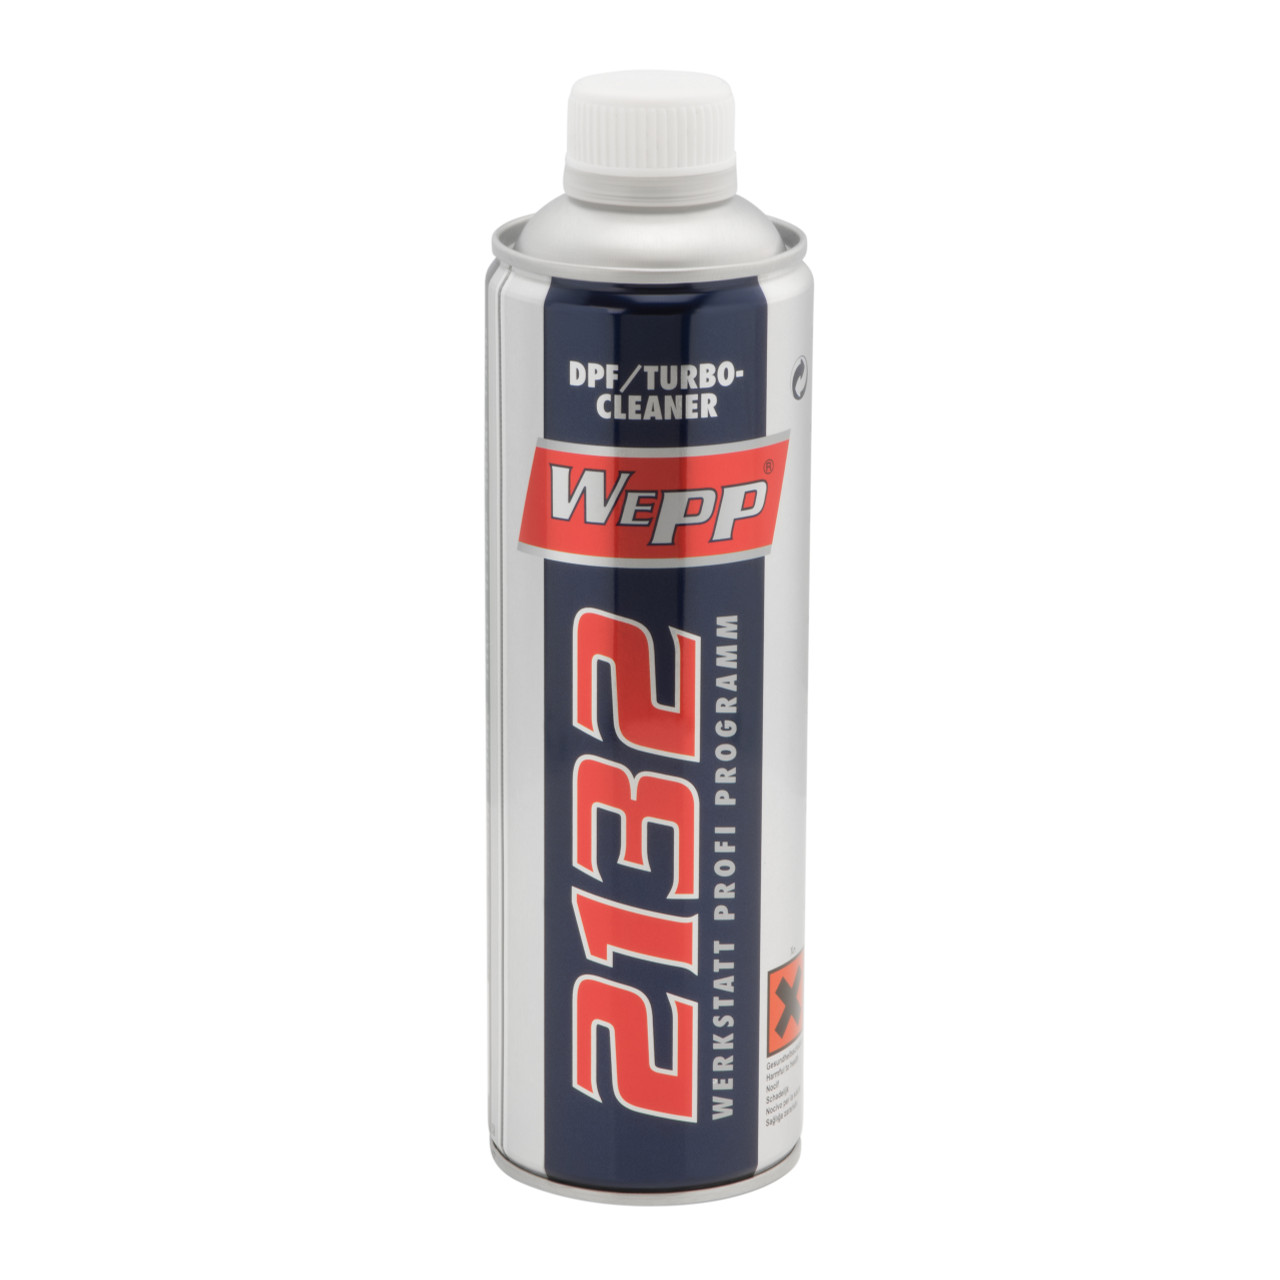 DPF cleaning product for Diesel motors